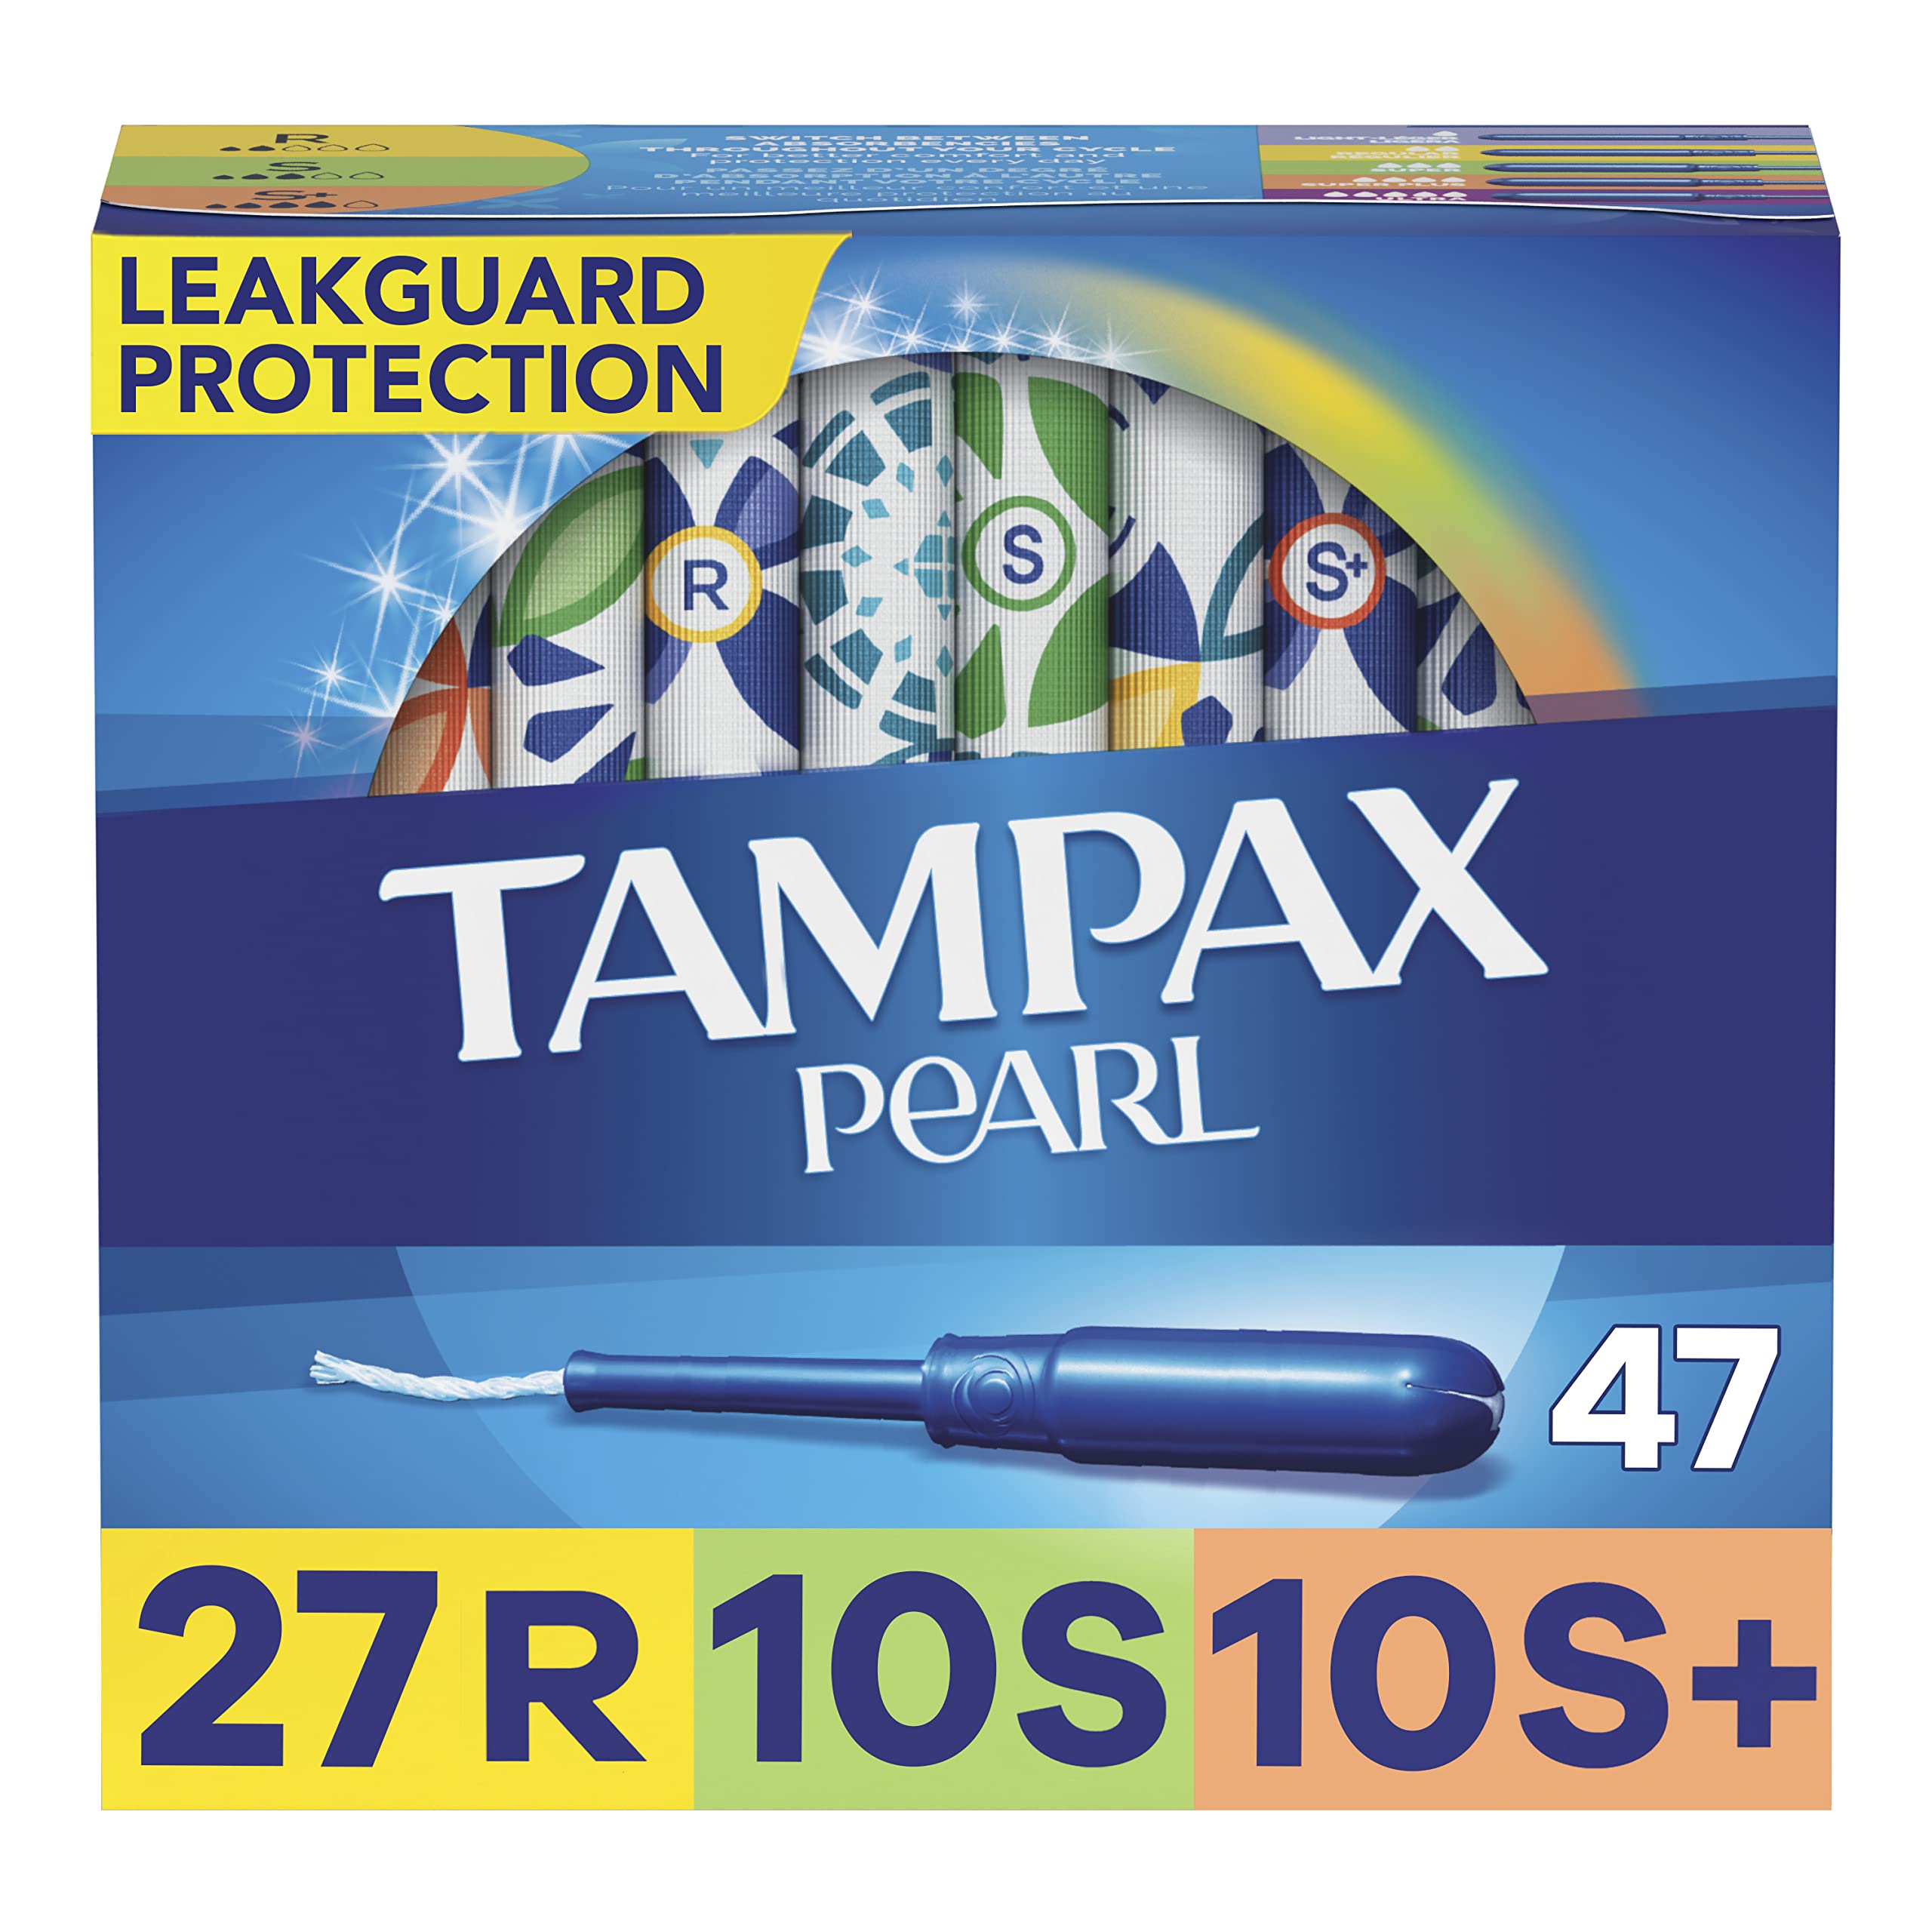 Tampax Pearl Tampons Trio Pack, with LeakGuard Braid, Regular/Super/Super Plus Absorbency, Unscented, 47 Count